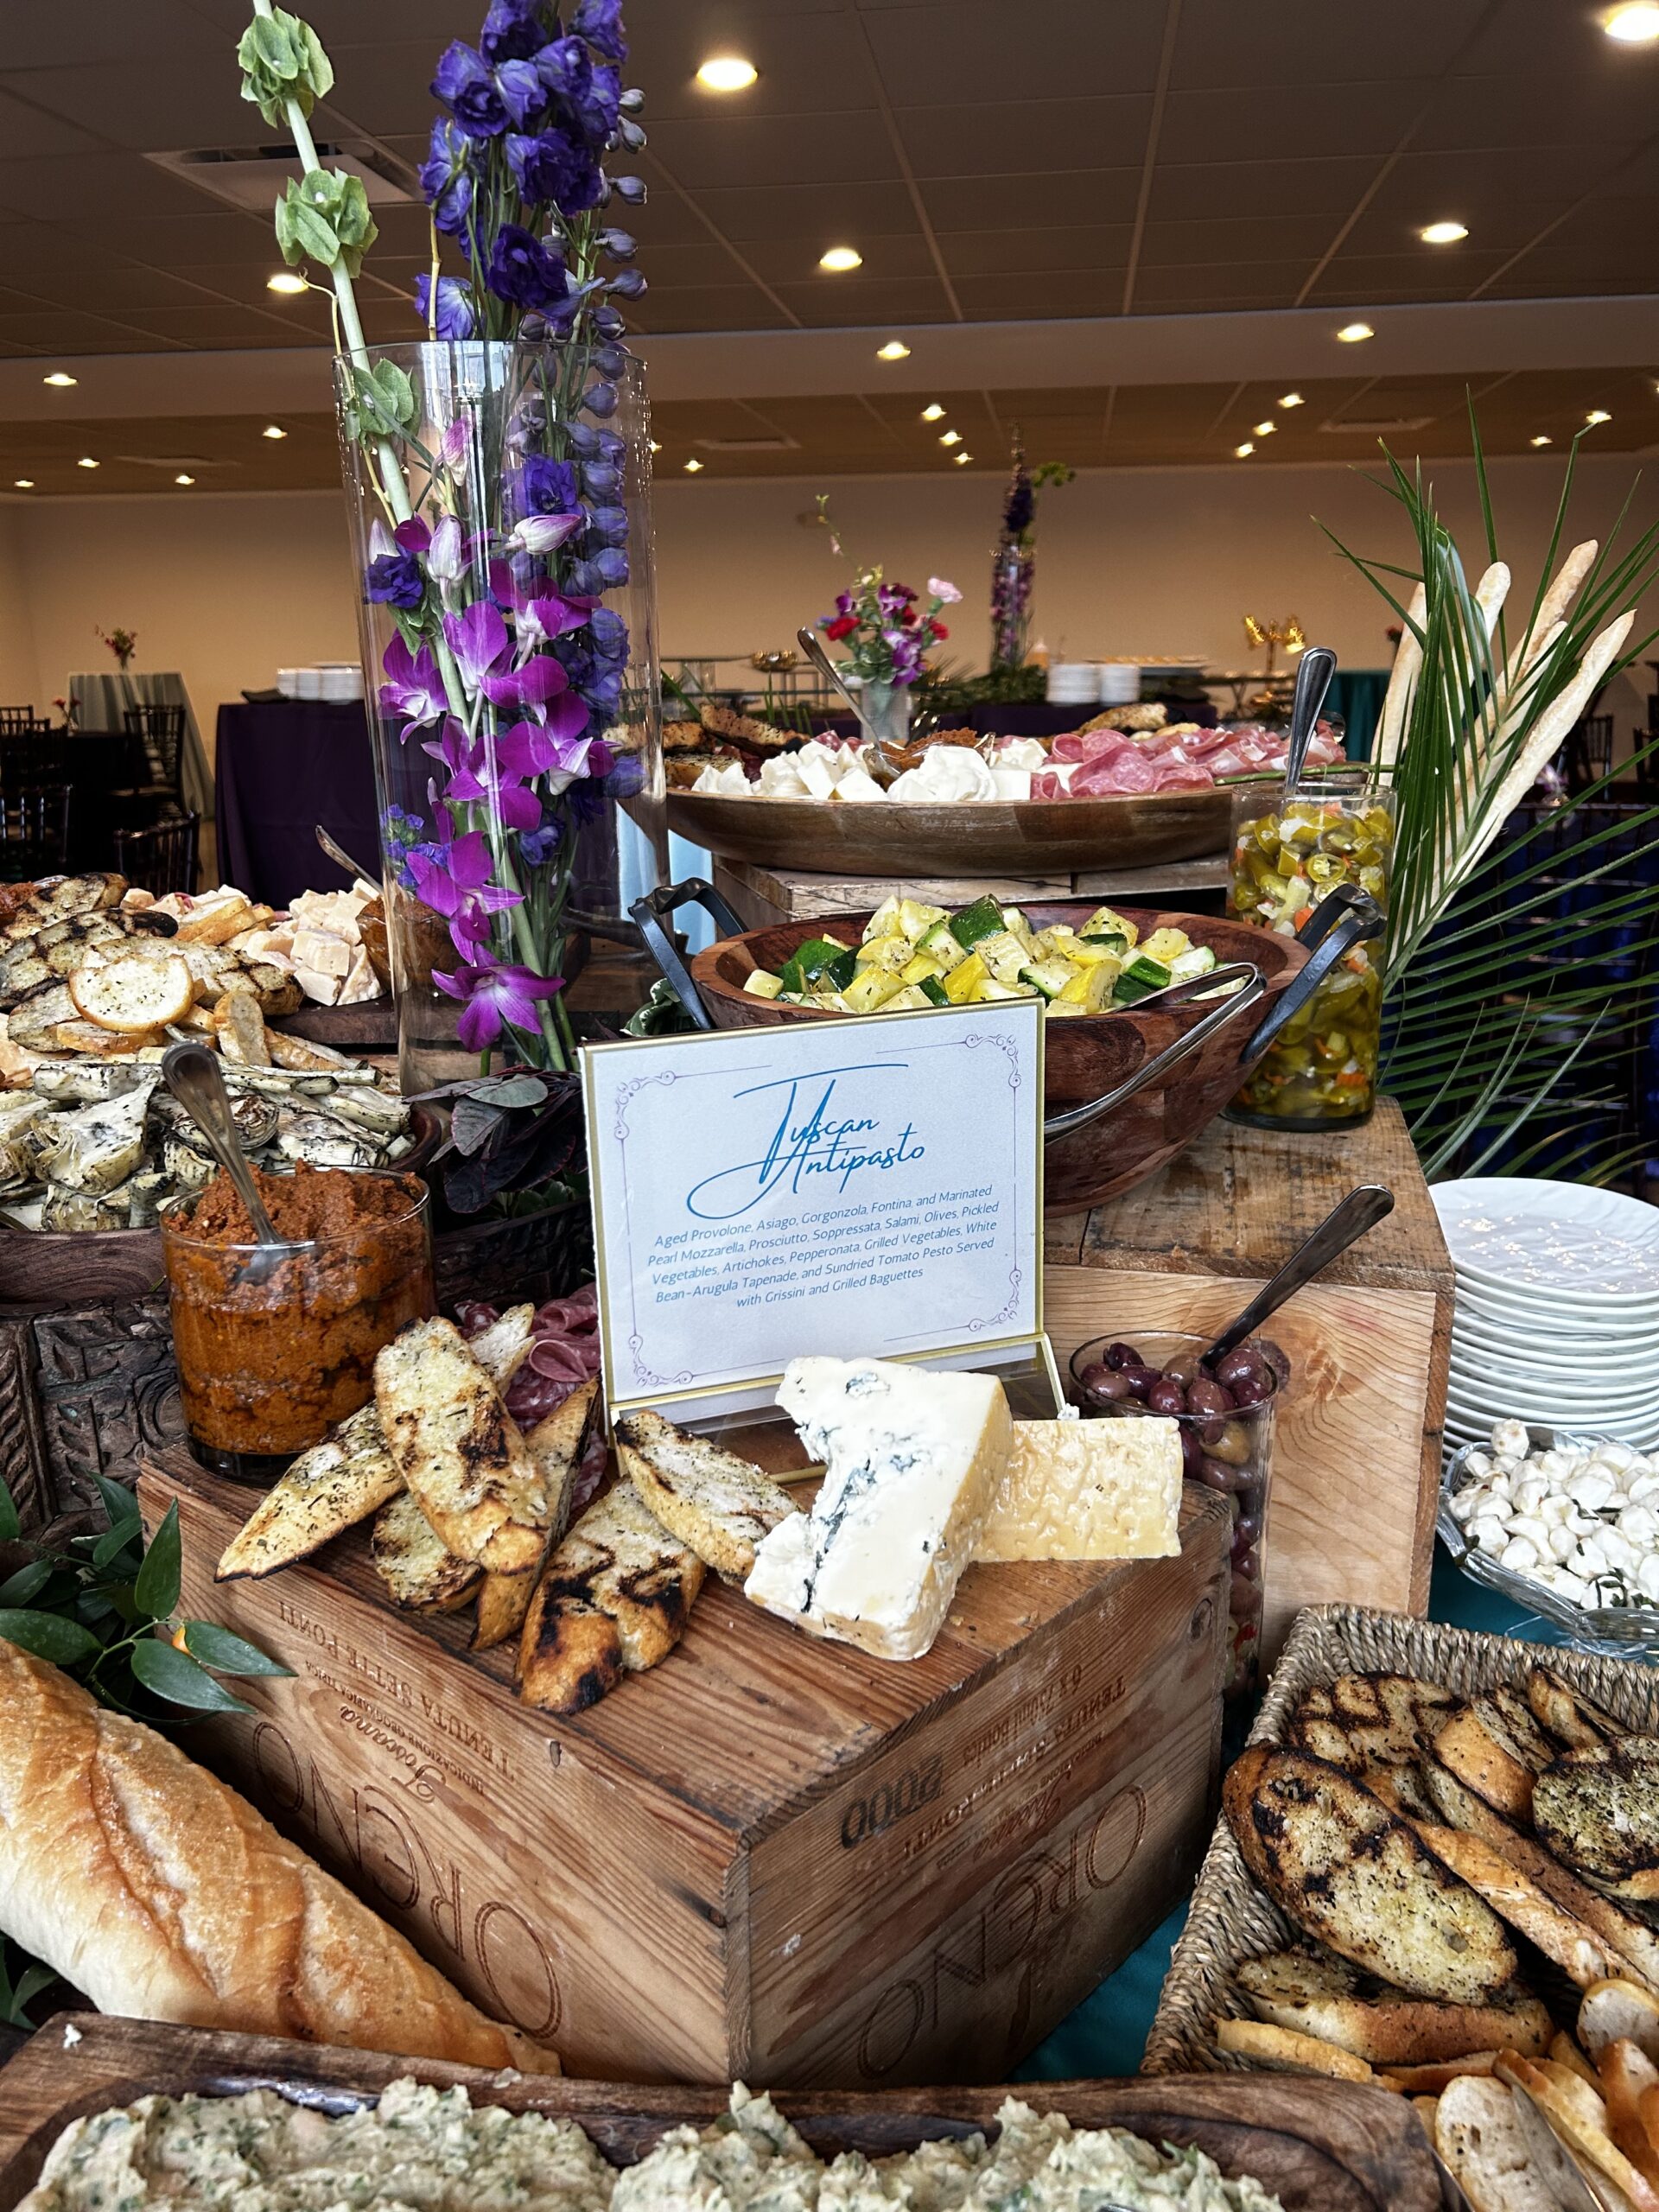 With an eye for current catering trends, we source locally to provide a service that tastes as beautiful as it looks.